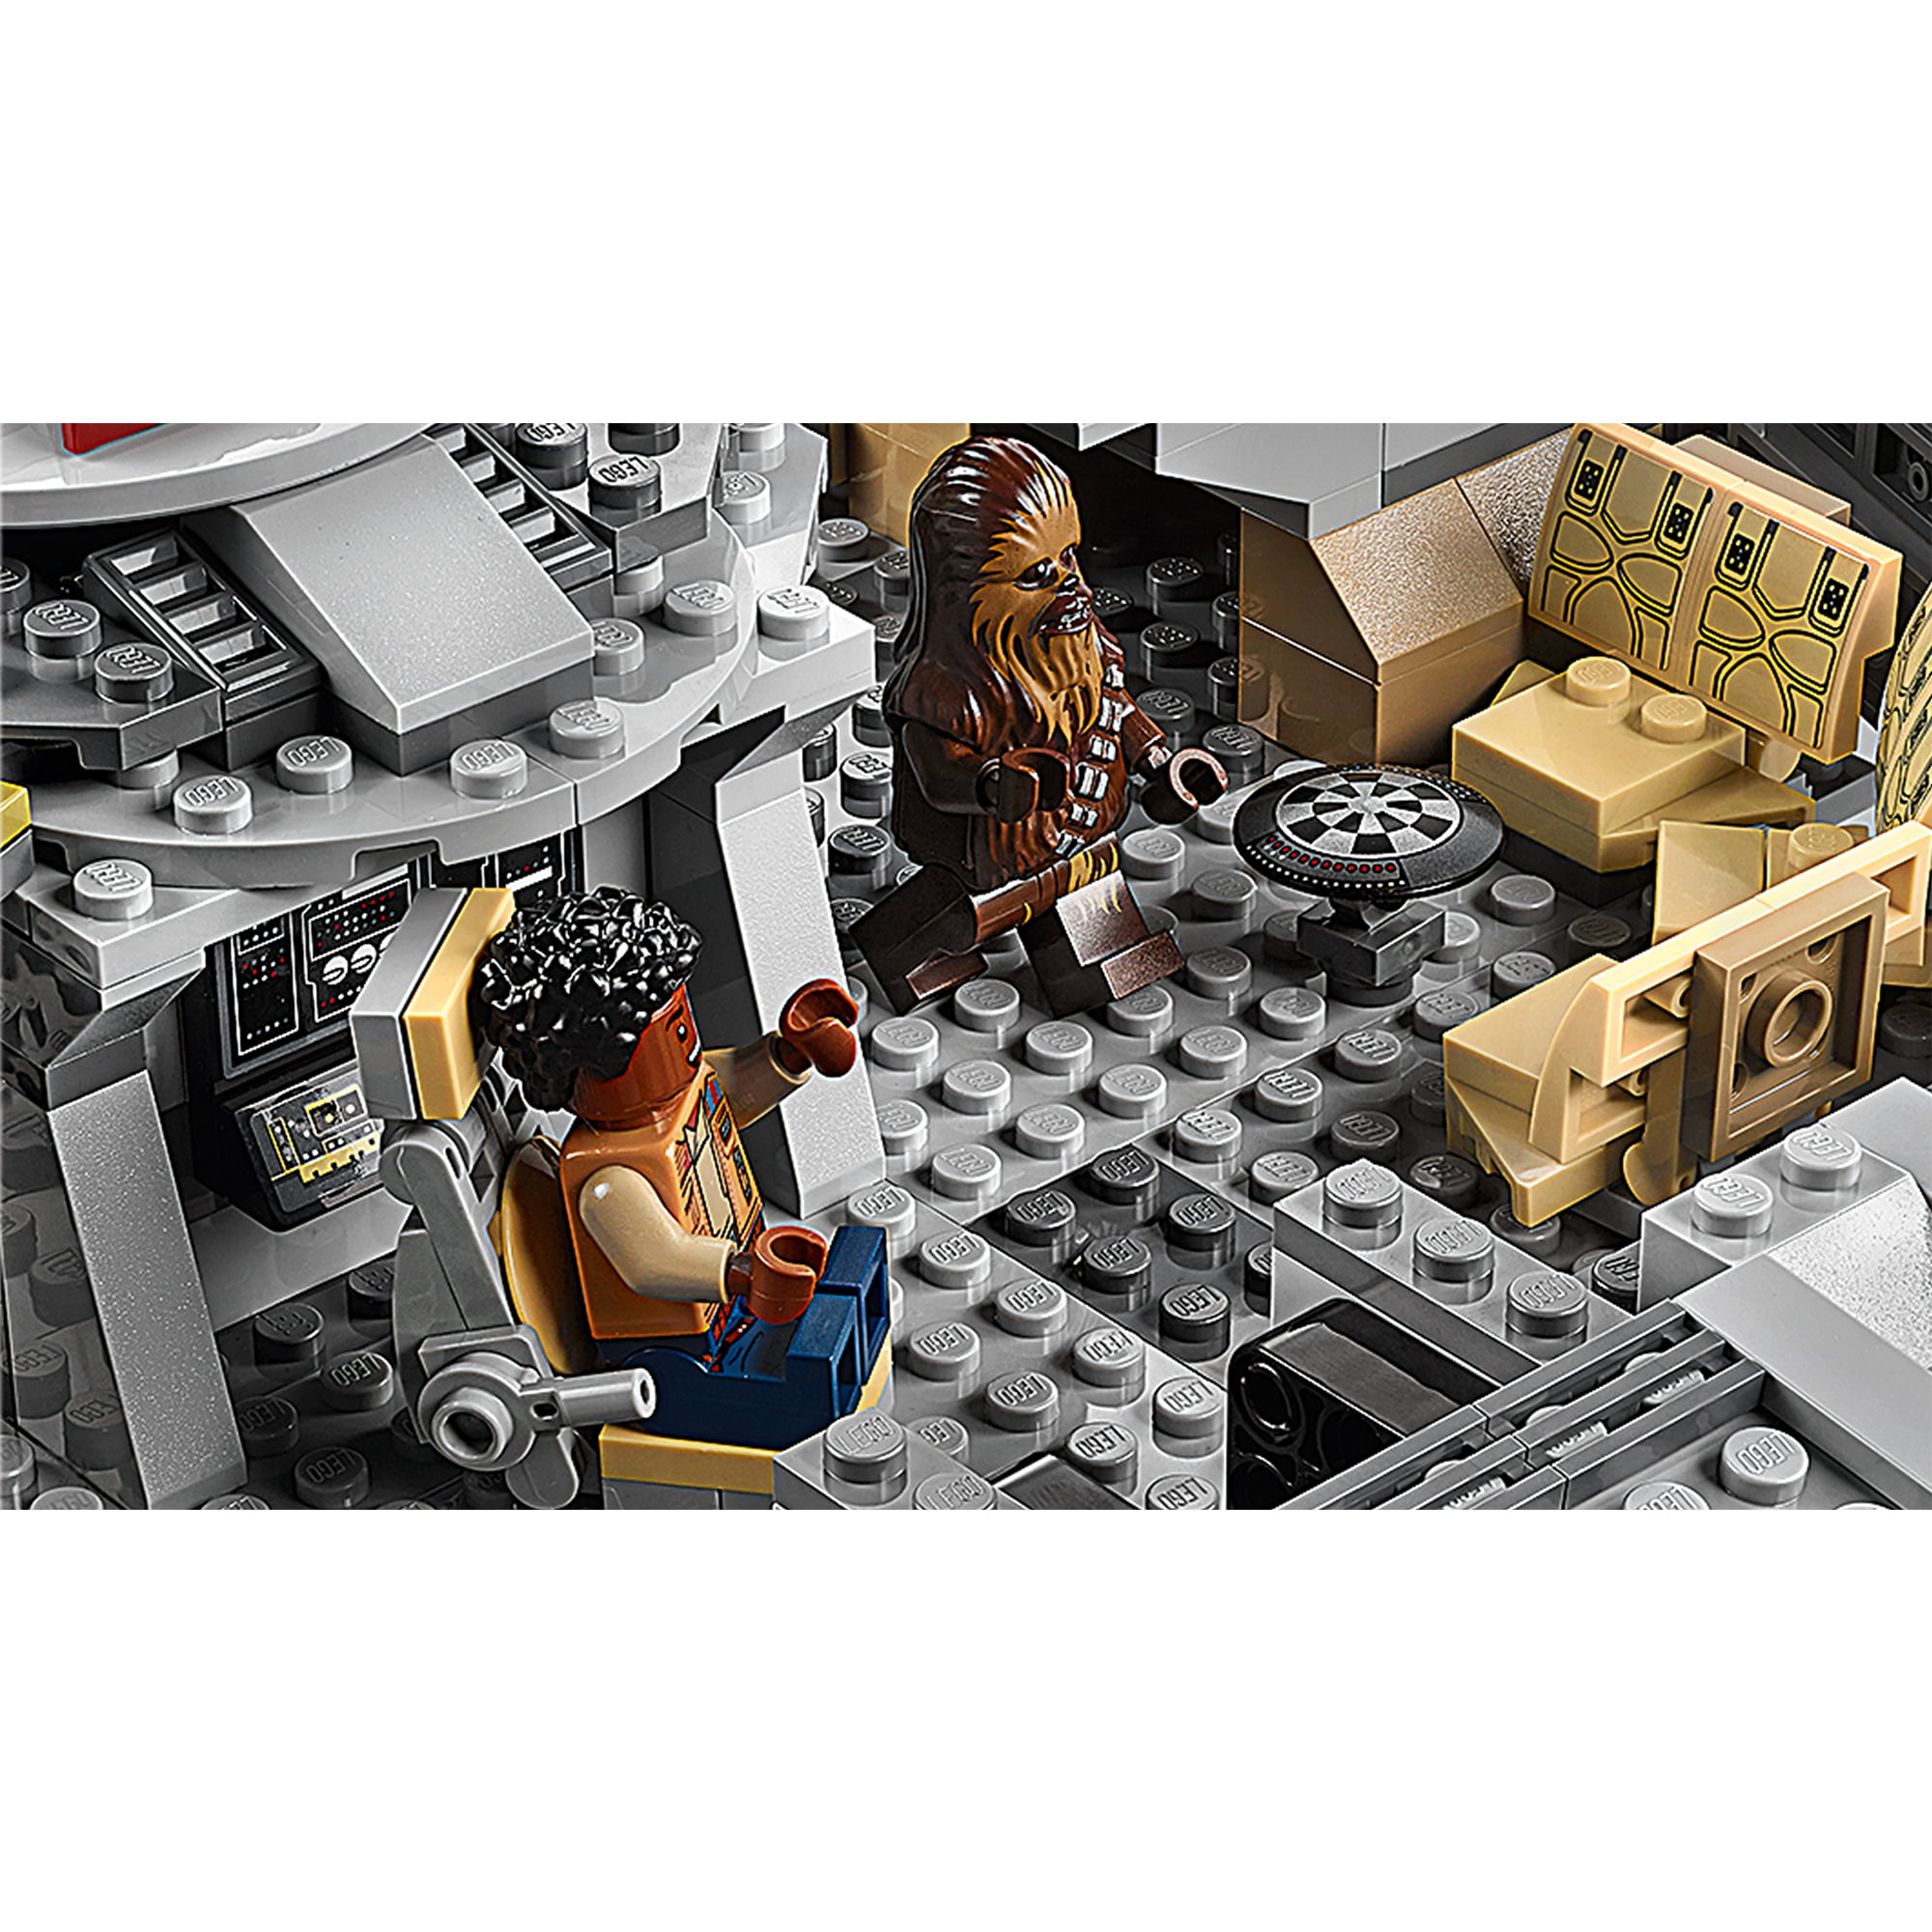 LEGO Star Wars: The Rise of Skywalker Millennium Falcon 75257 Starship  Model Building Kit and Minifigures (1,351 Pieces) 